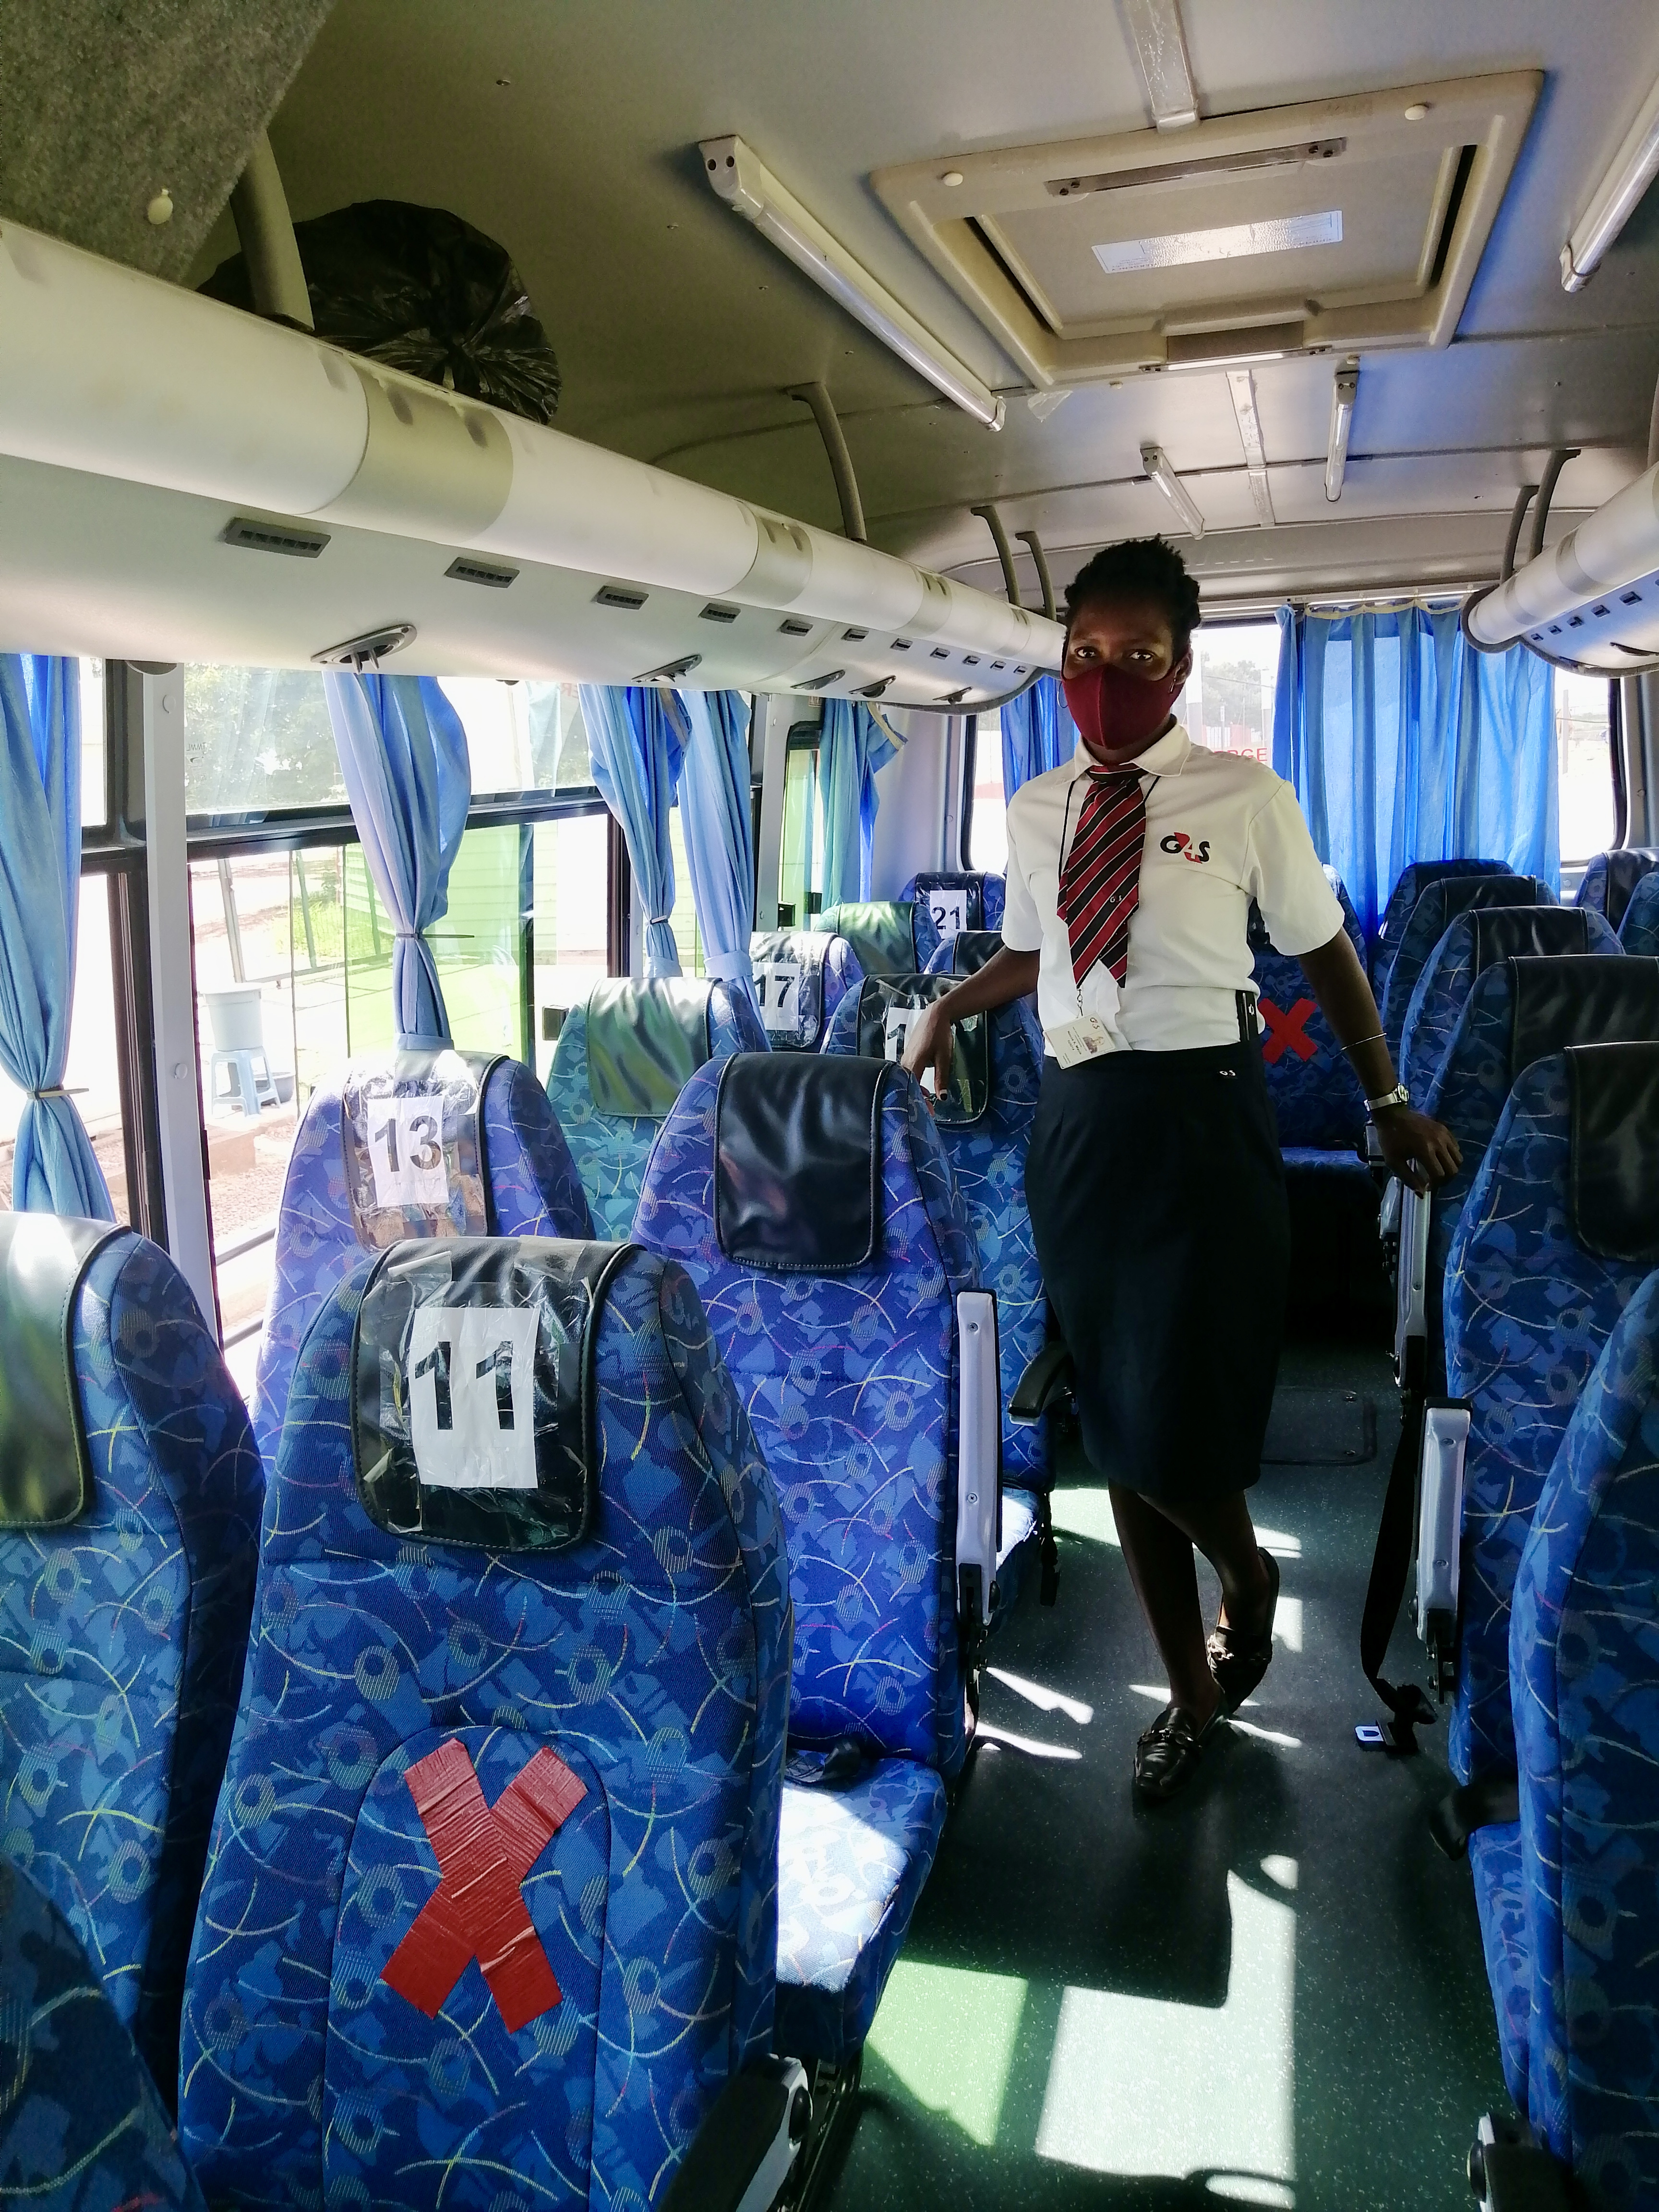 Safety measures have been put in place on the buses at AKA Maputo to prevent the spread of COVID-19